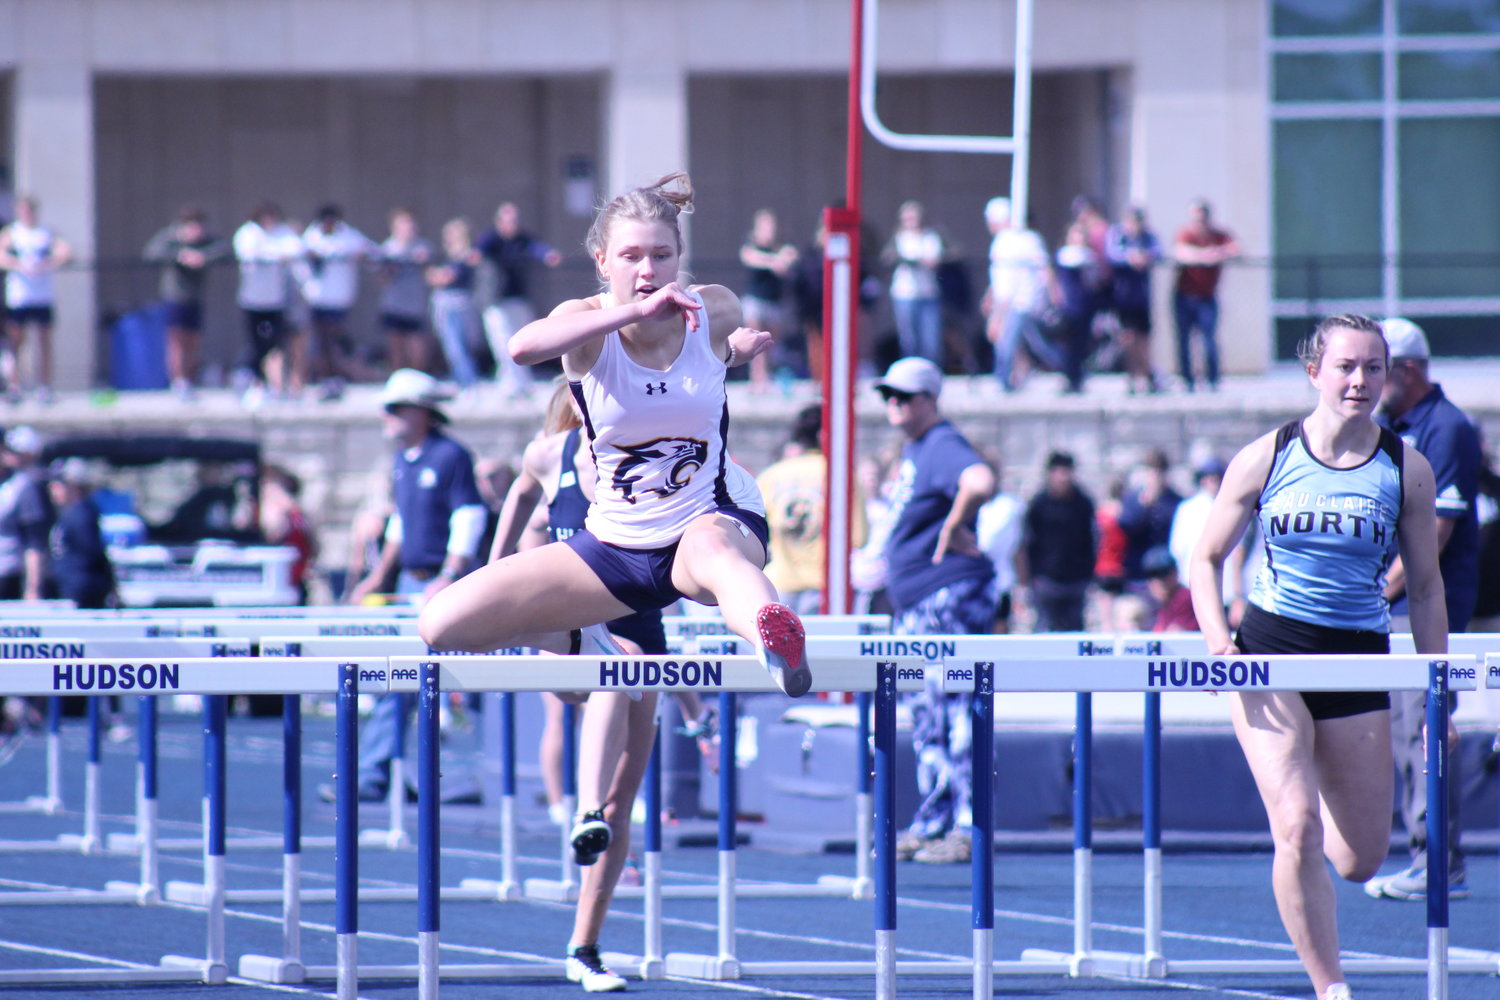 Then-senior Brianna Strehlau of the River Falls track and field team wins the 100-meter hurdles event at the regional track meet in Hudson last spring. Strehlau is one of many valuable seniors River Falls lost to graduation after last season.